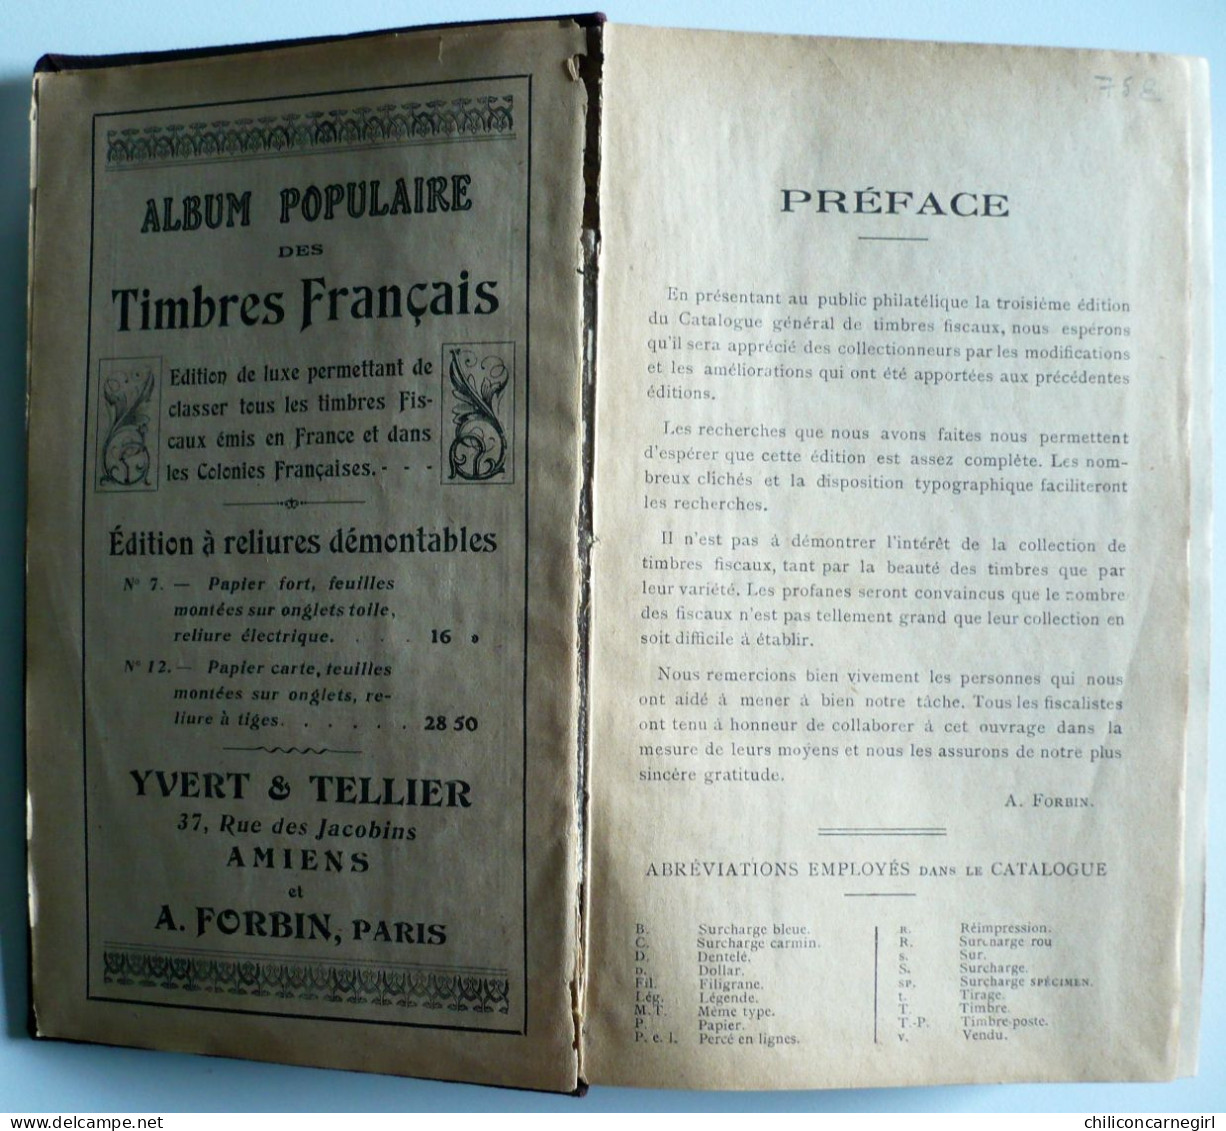 * FORBIN - Catalogue Prix Courant de Timbres Fiscaux - Timbre Fiscal - YVERT TELLIER - 3 Edition - 1915 - 795 Pages